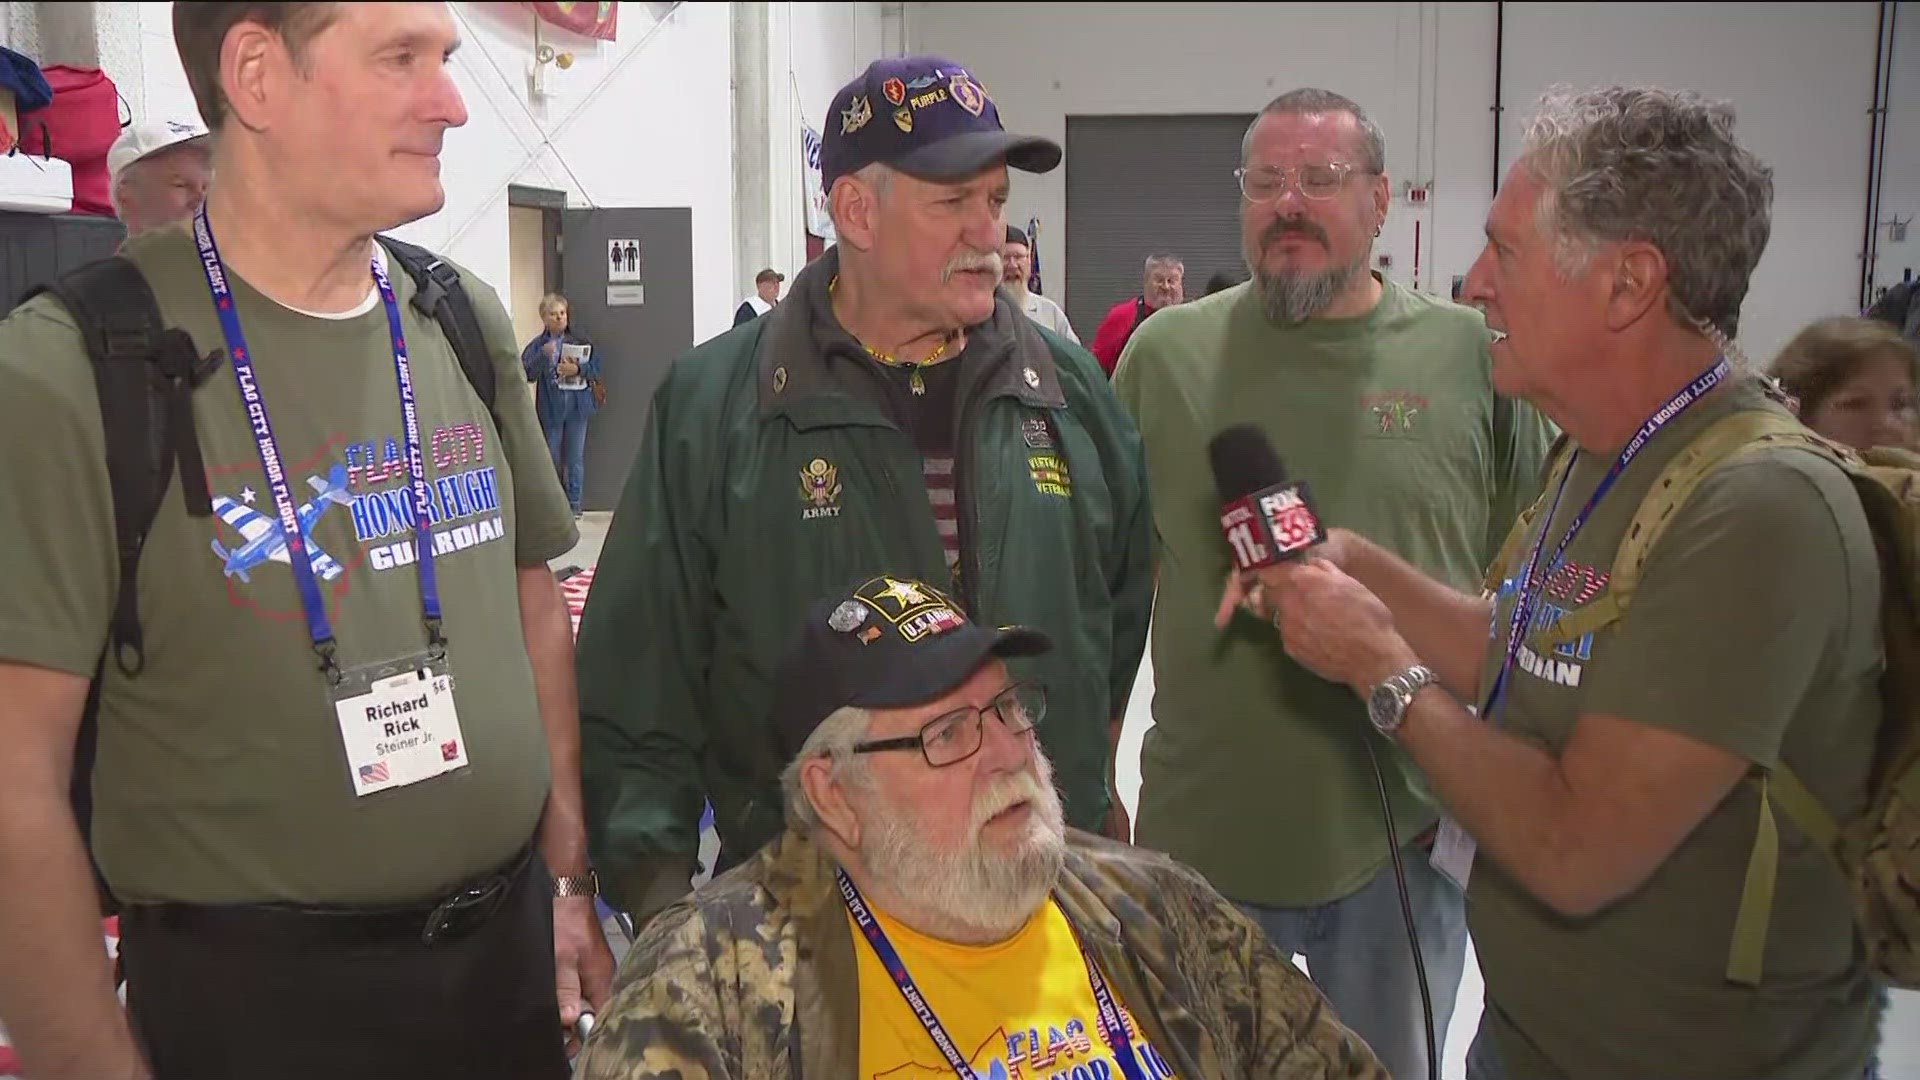 Dan Cummins chats with a pair of brothers who both served, including Butch Stewart, whose brother Bob enlisted in the Vietnam War so Butch wouldn't have to.